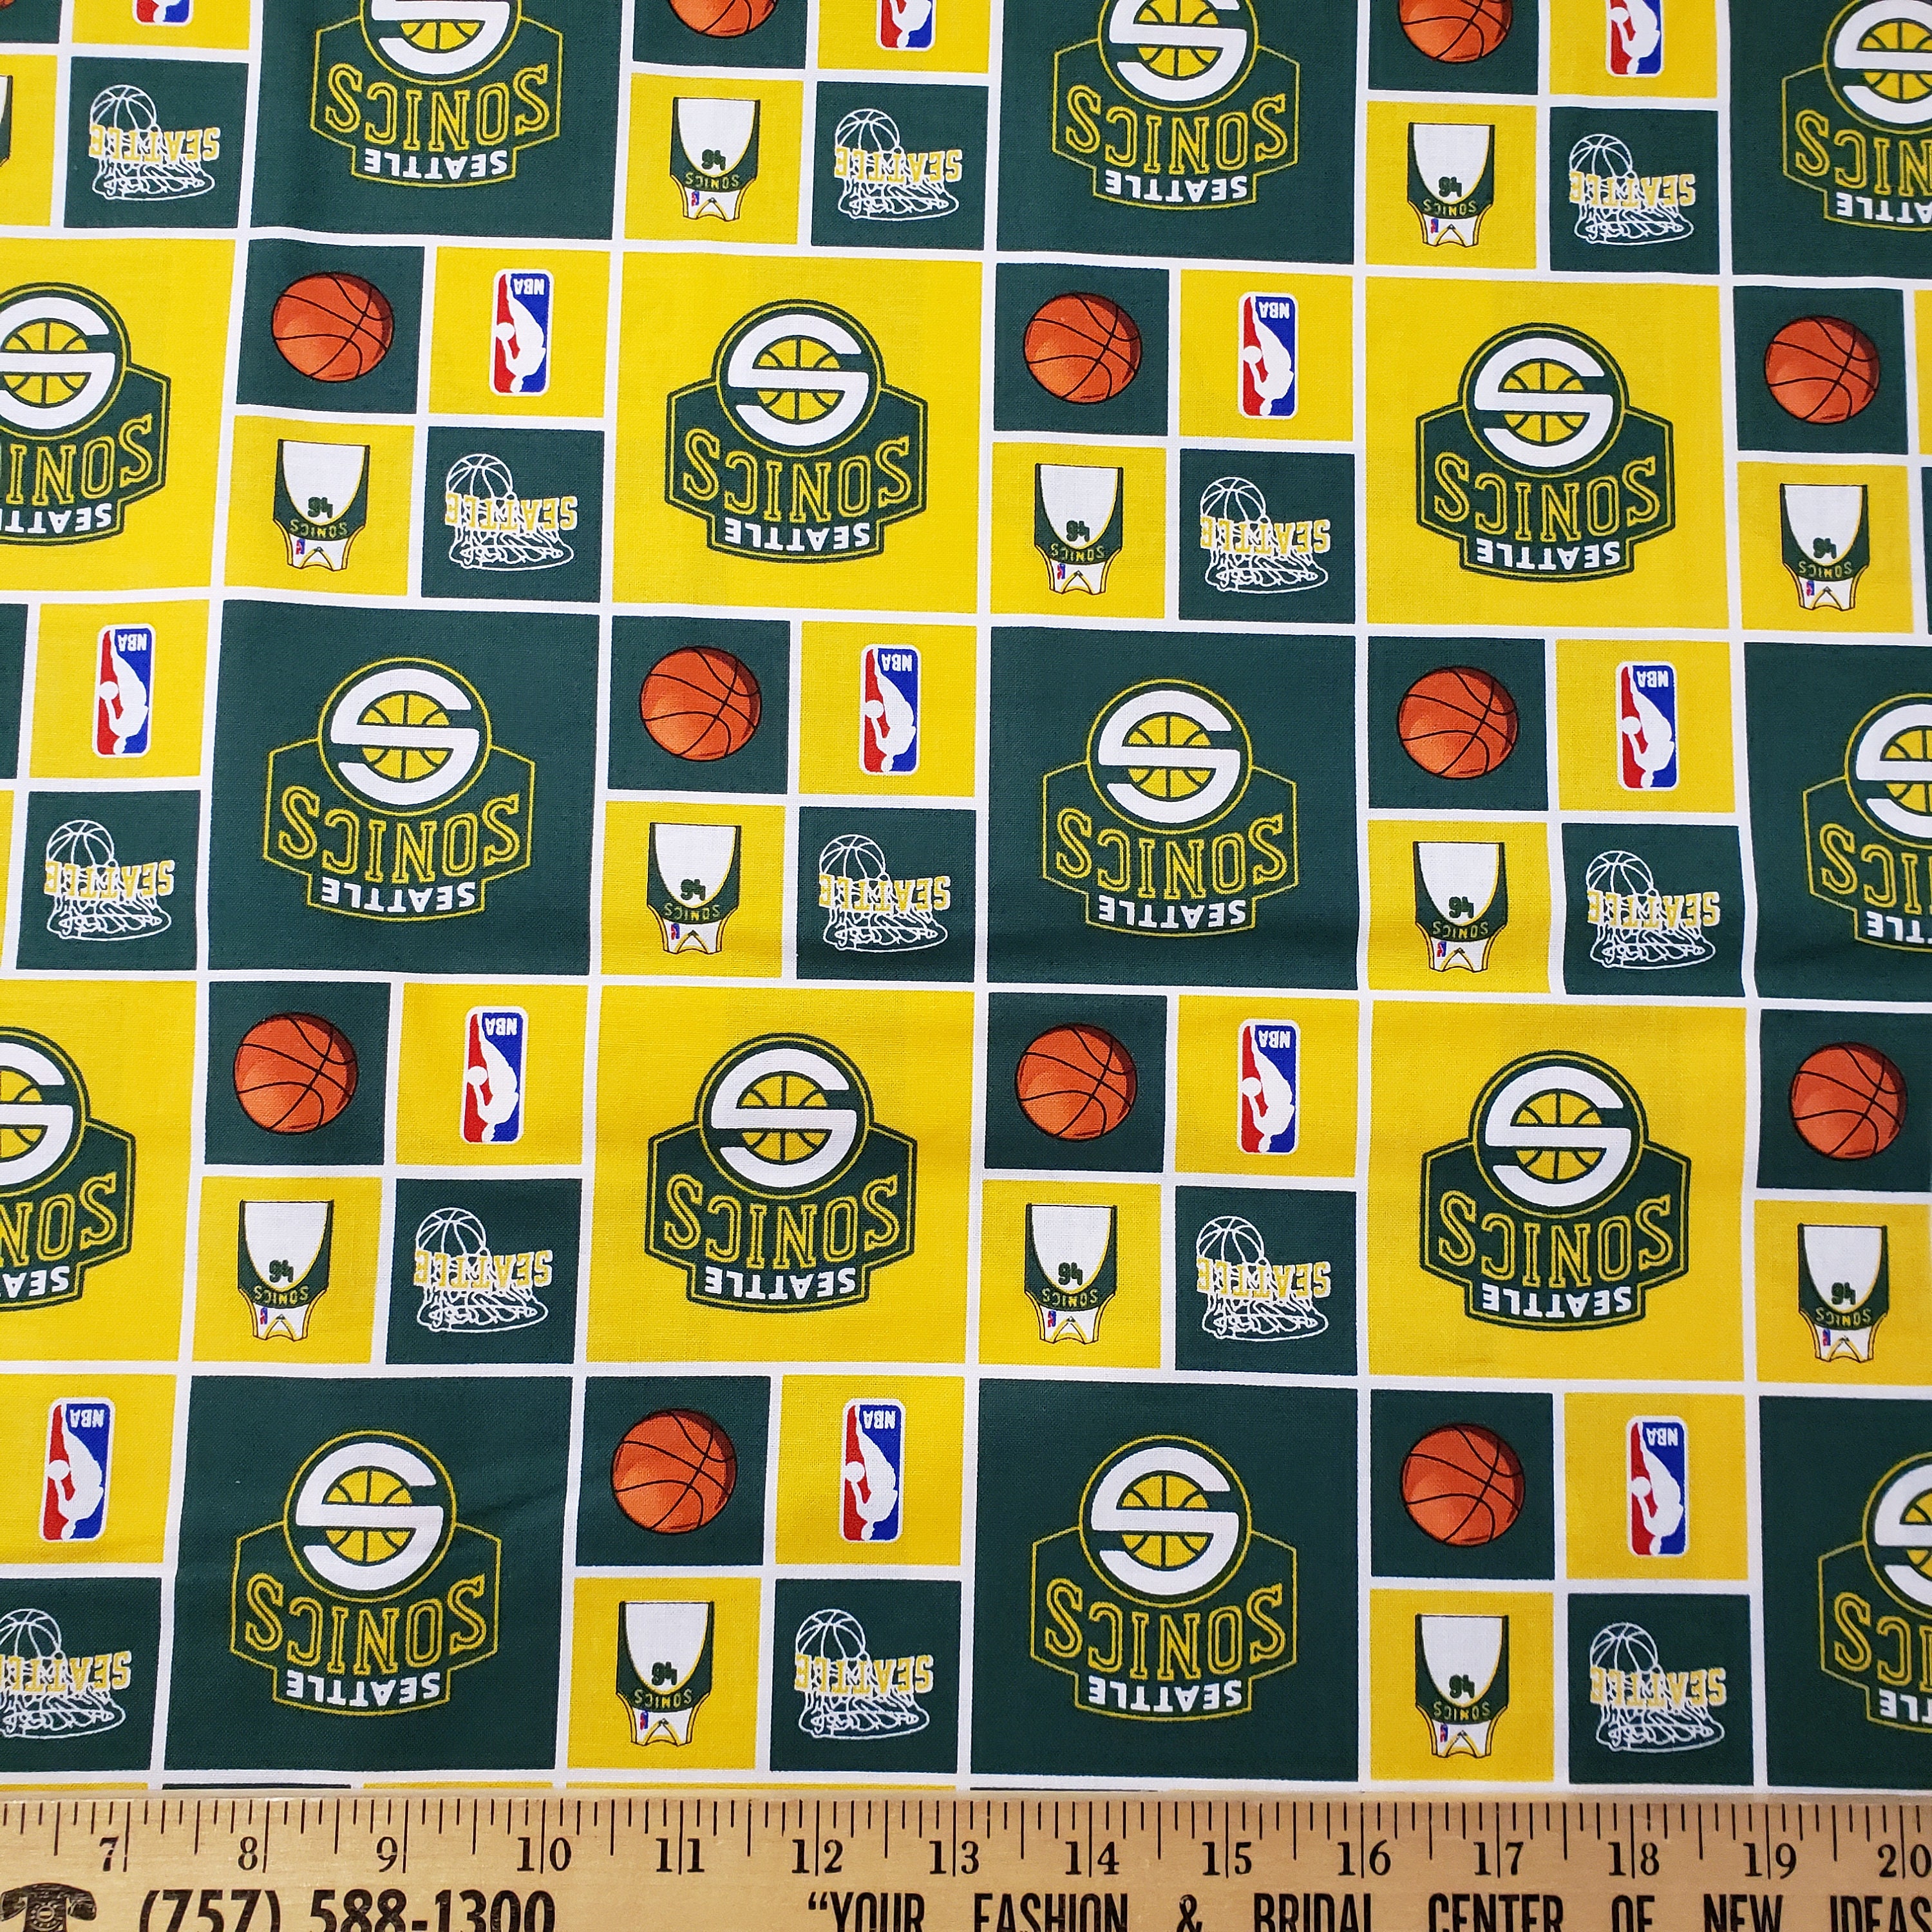 15 Seattle Supersonics All Jerseys and Logos ideas